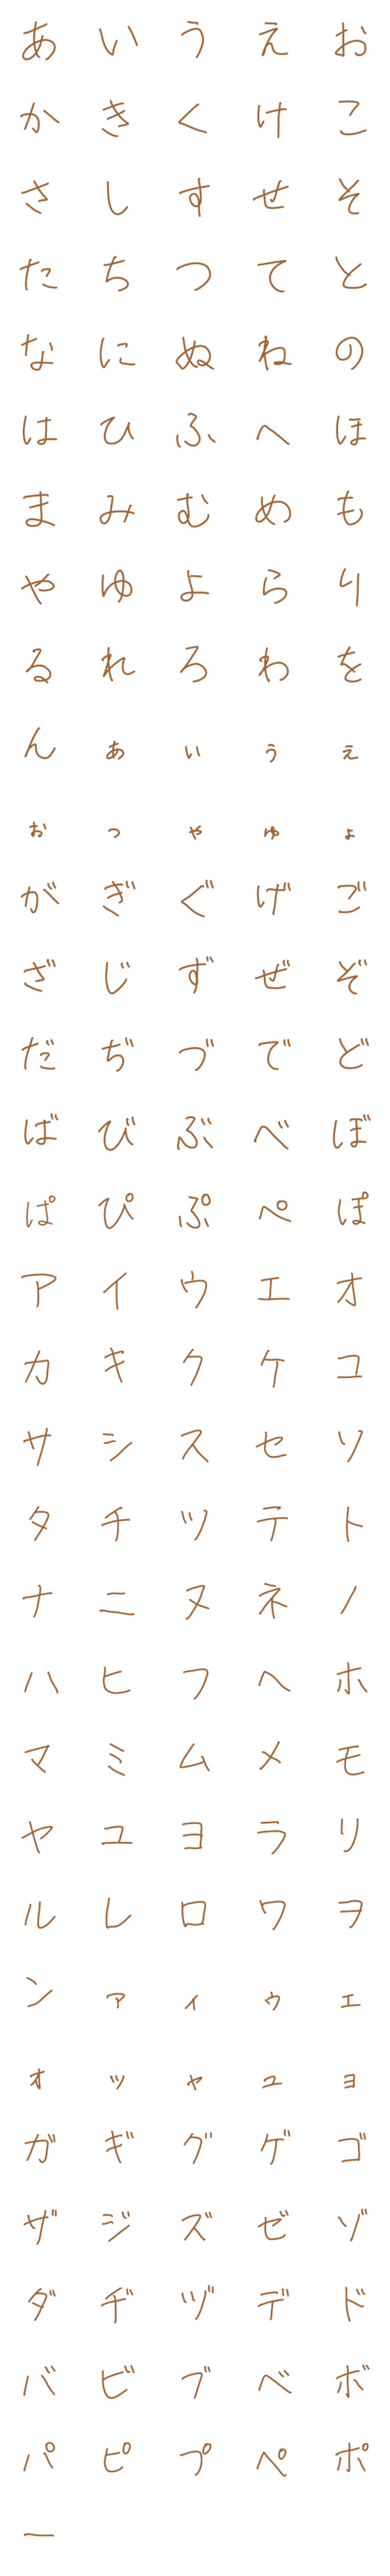 [LINE絵文字]淡色文字の画像一覧